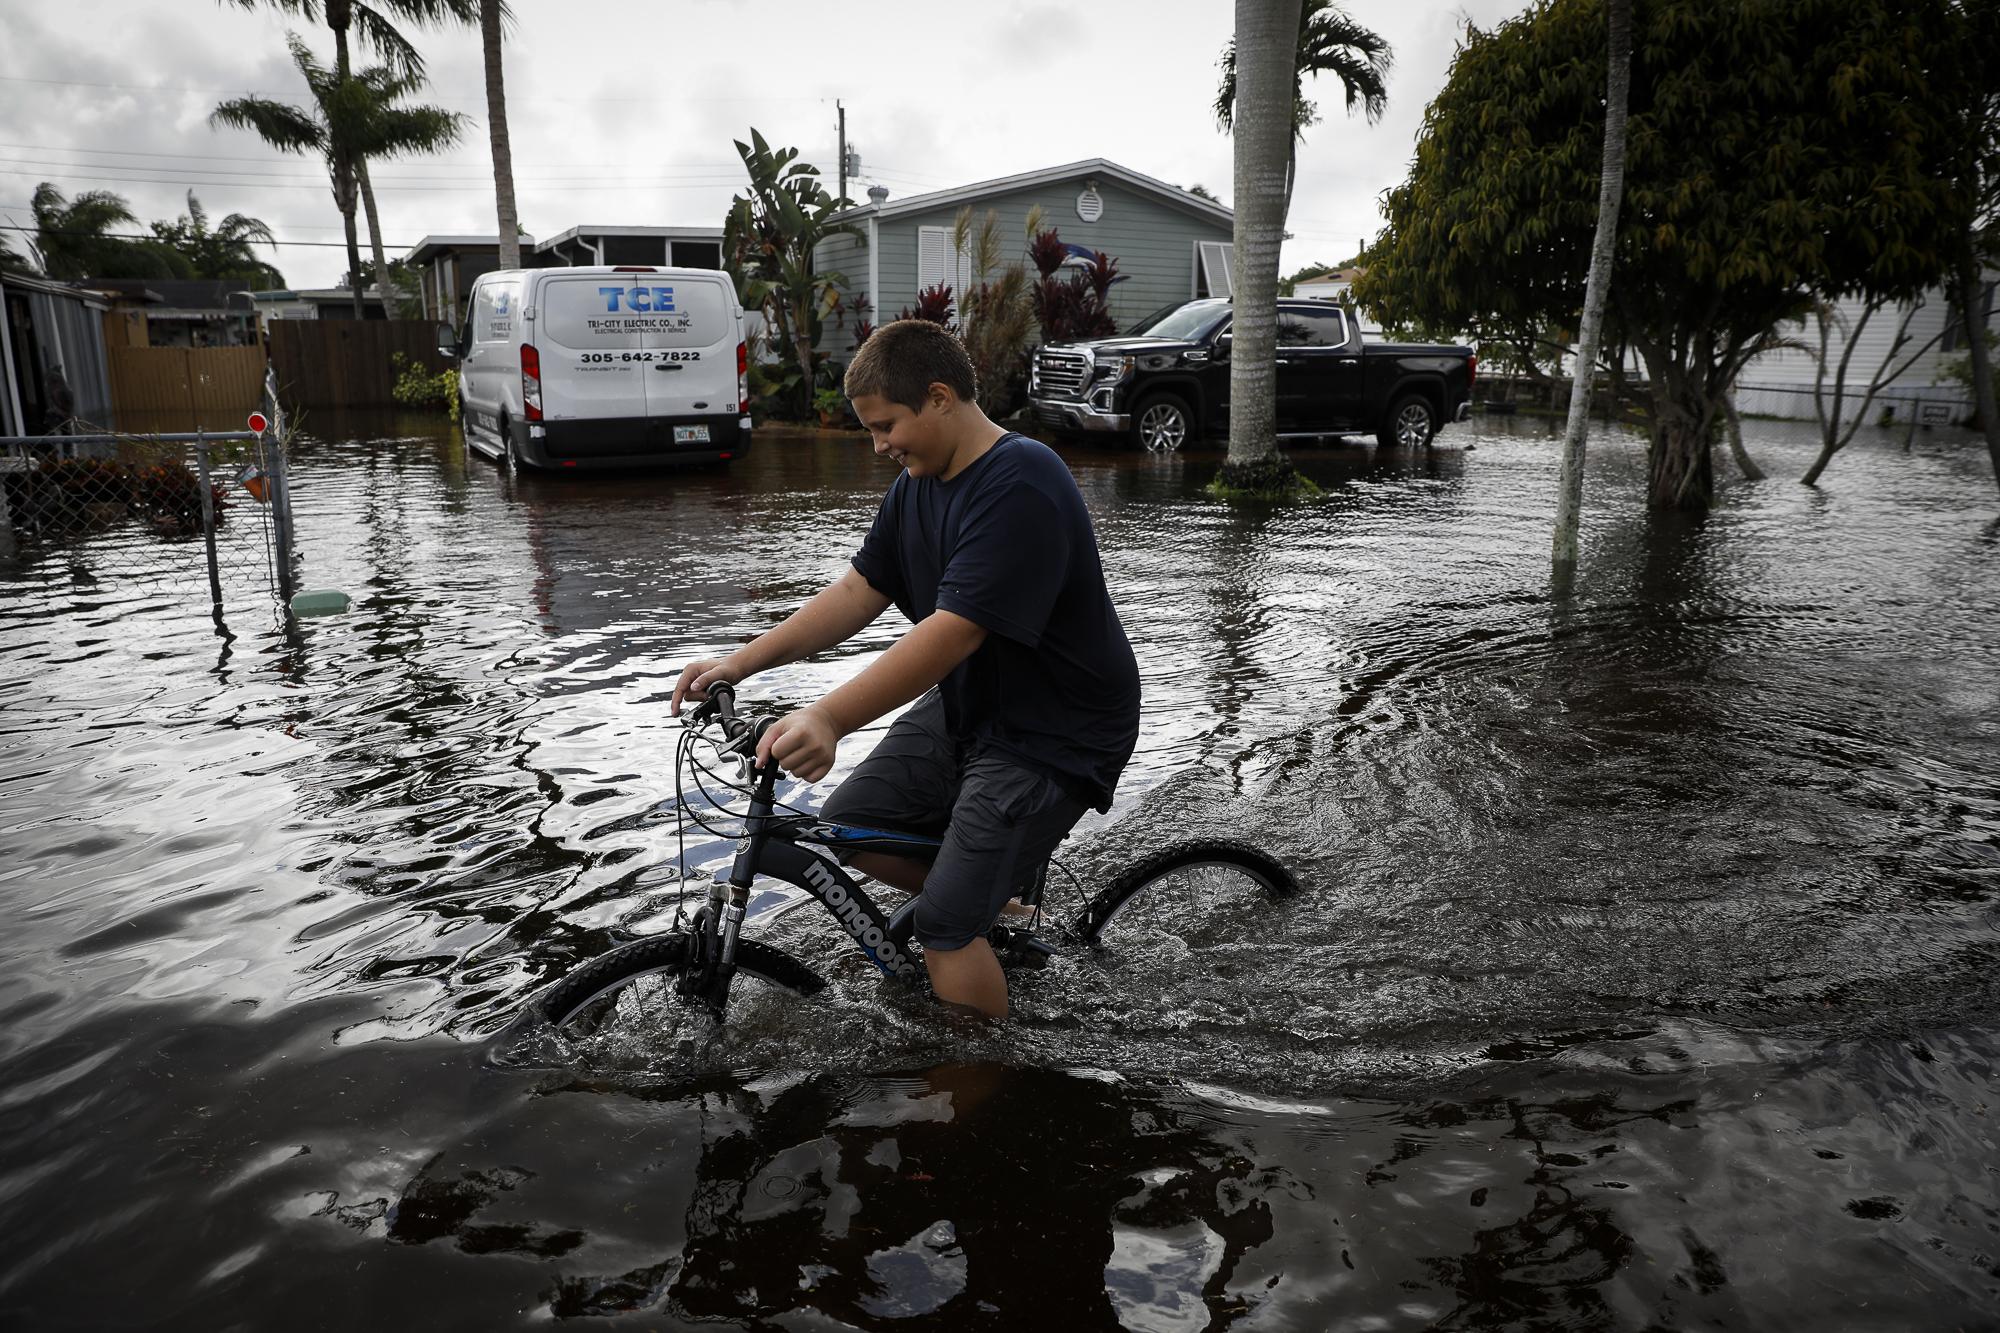 Tropical Storm Eta drenches South Florida - A boy rides a bicycle in floodwaters caused by Storm Eta...